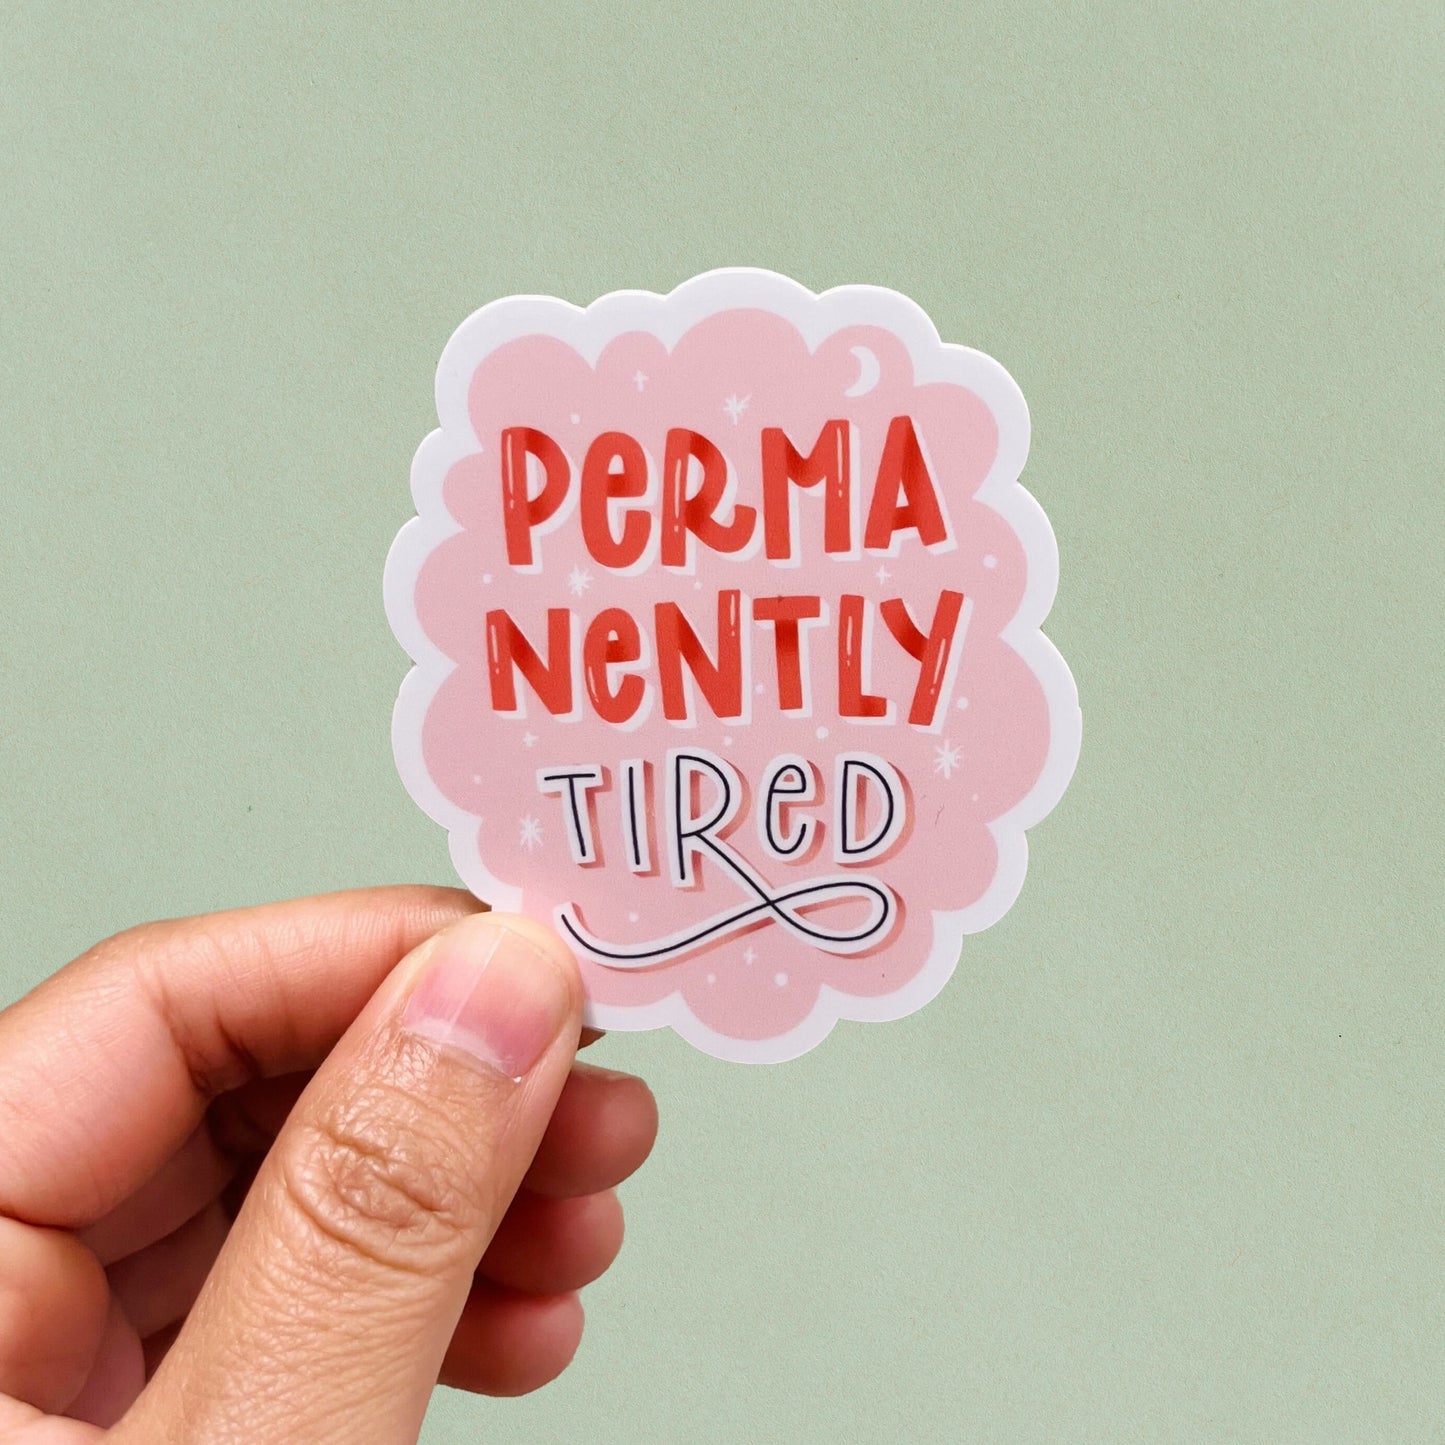 Permanently Tired Sticker